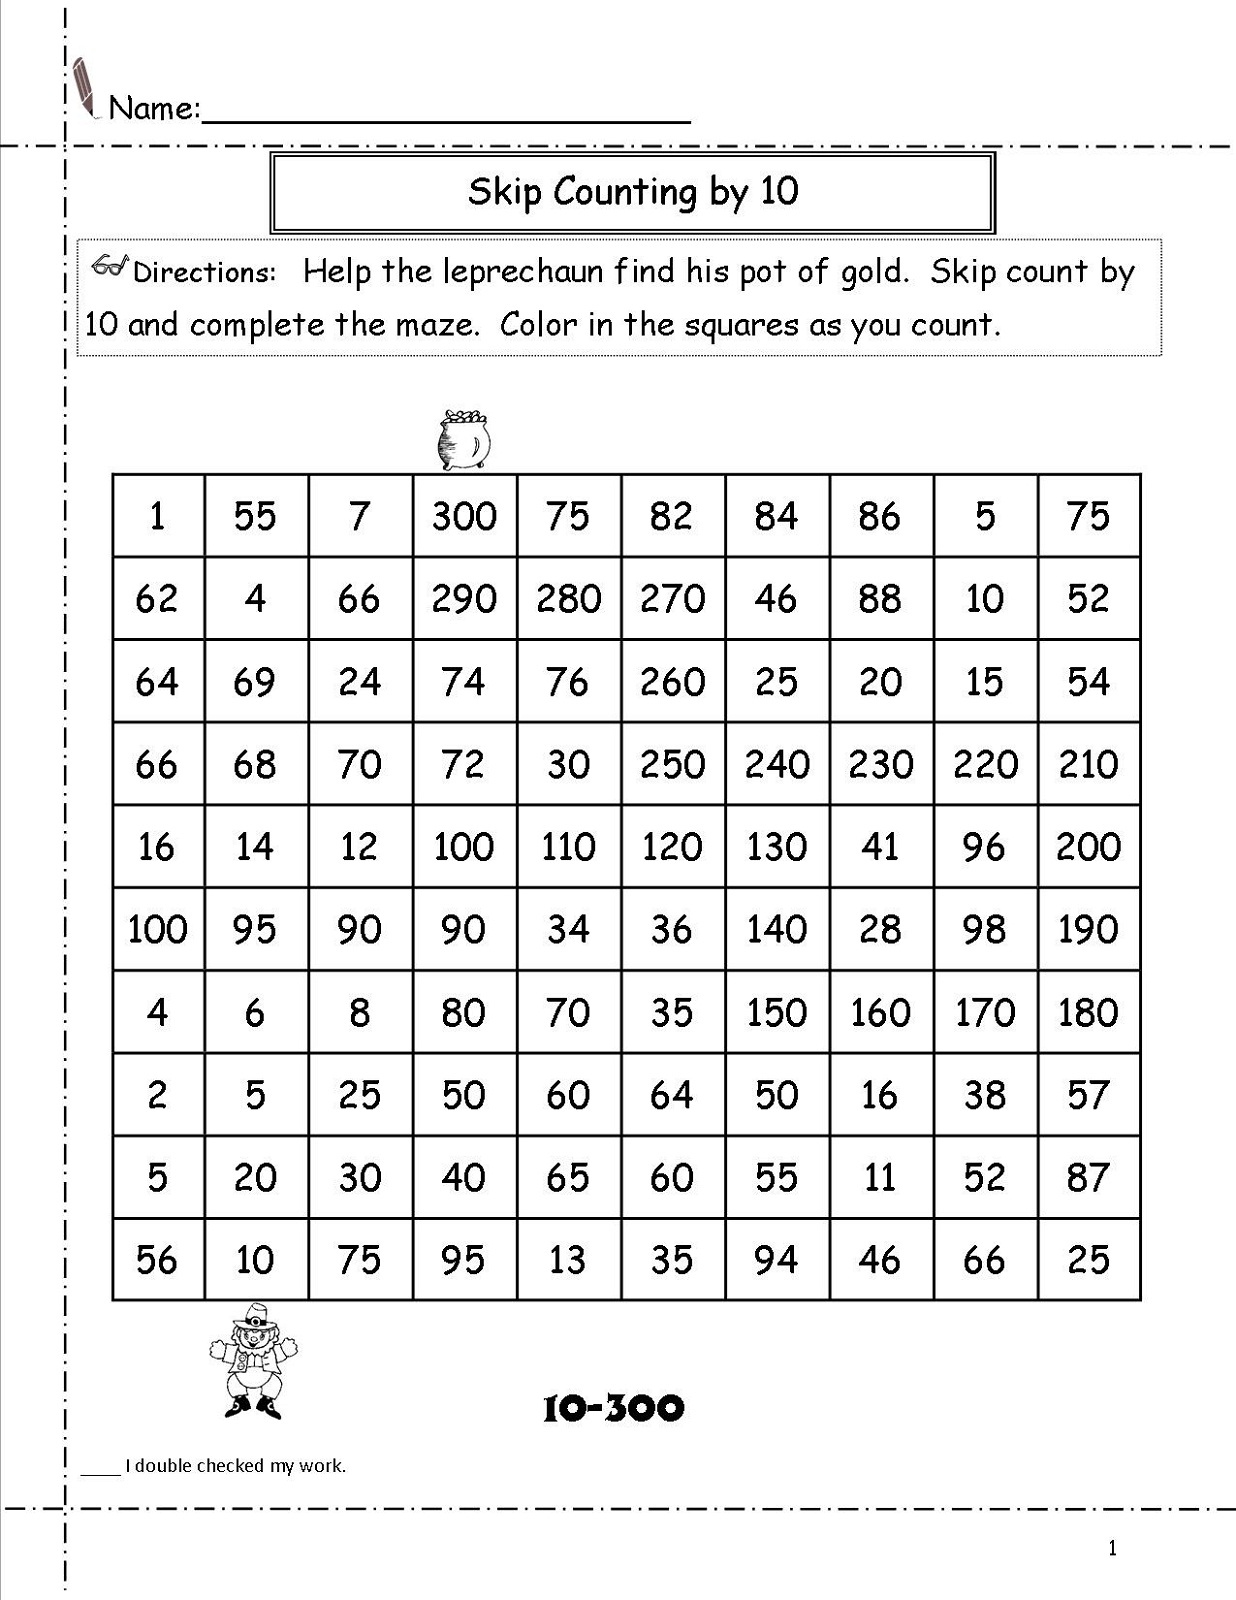 skip-count-by-10-worksheet-maze